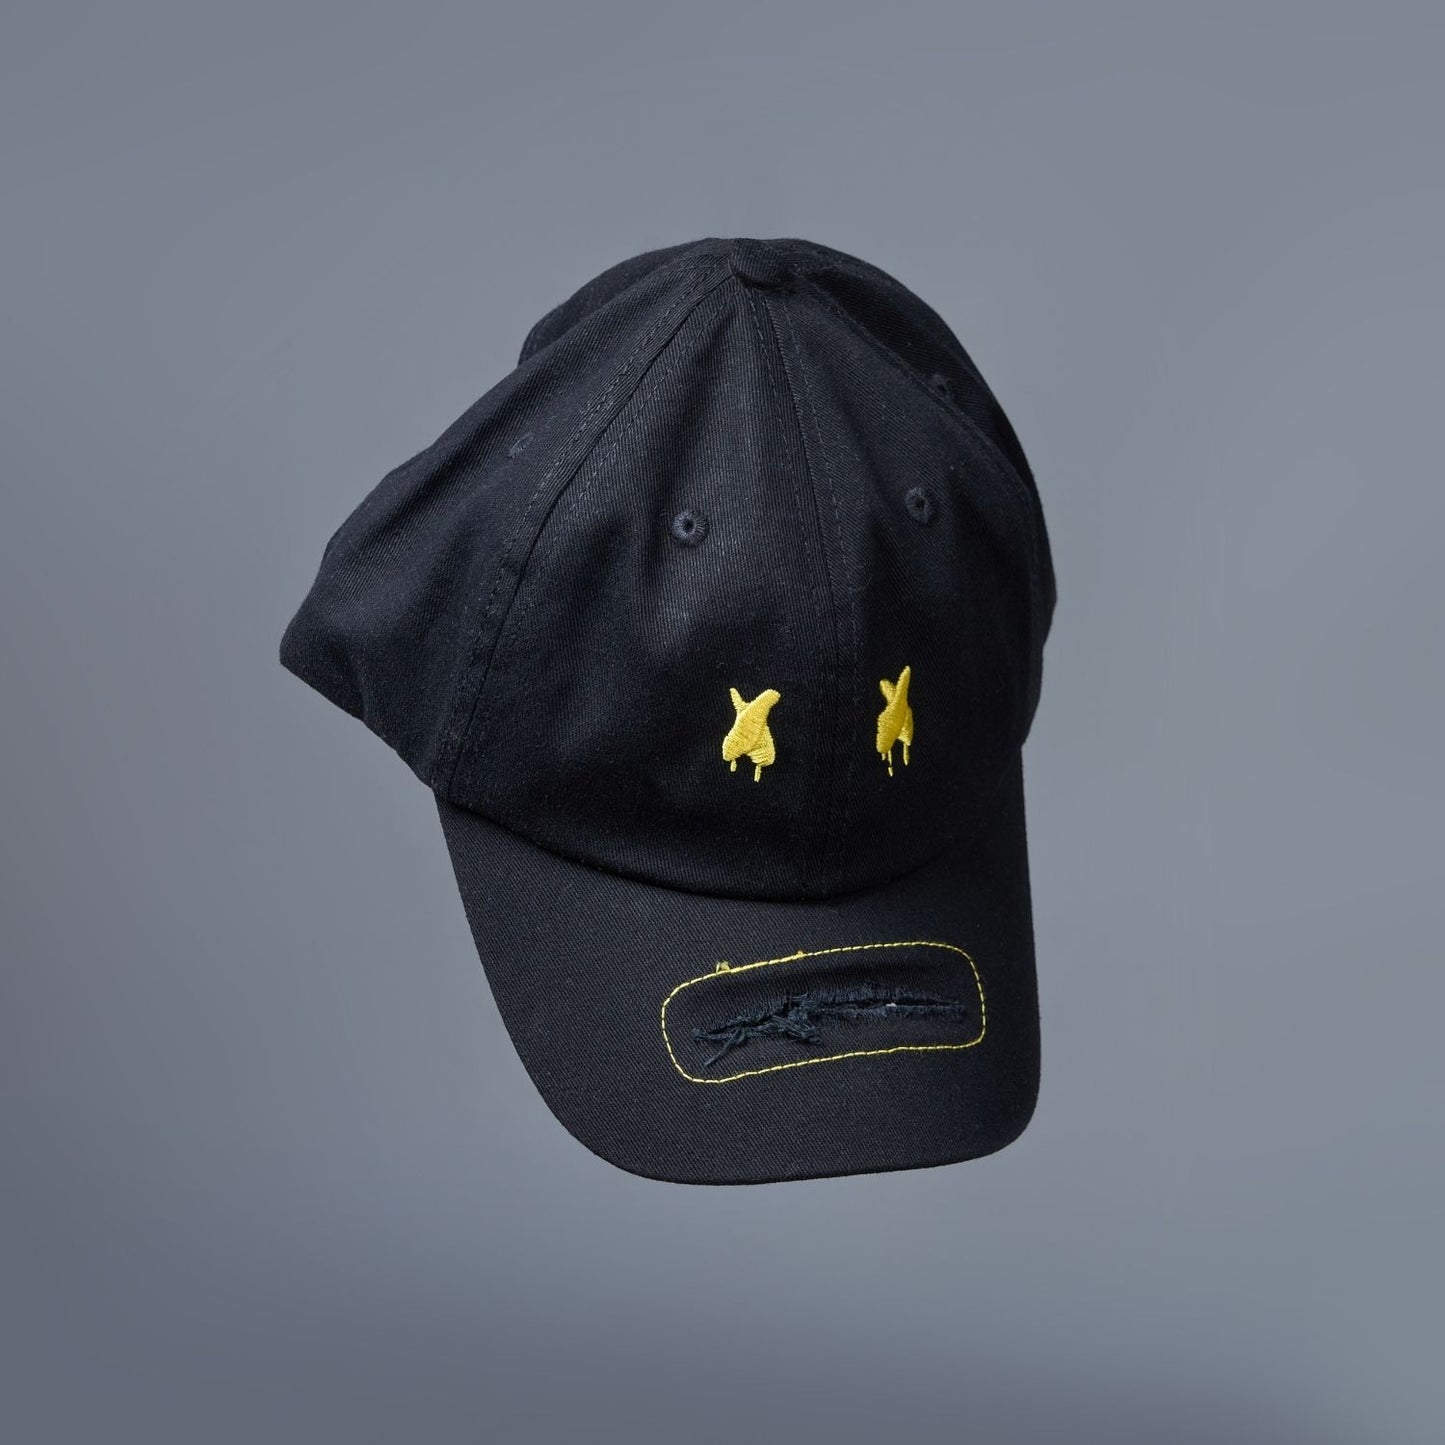 Detailed view of Black colored solid basic cap for men.